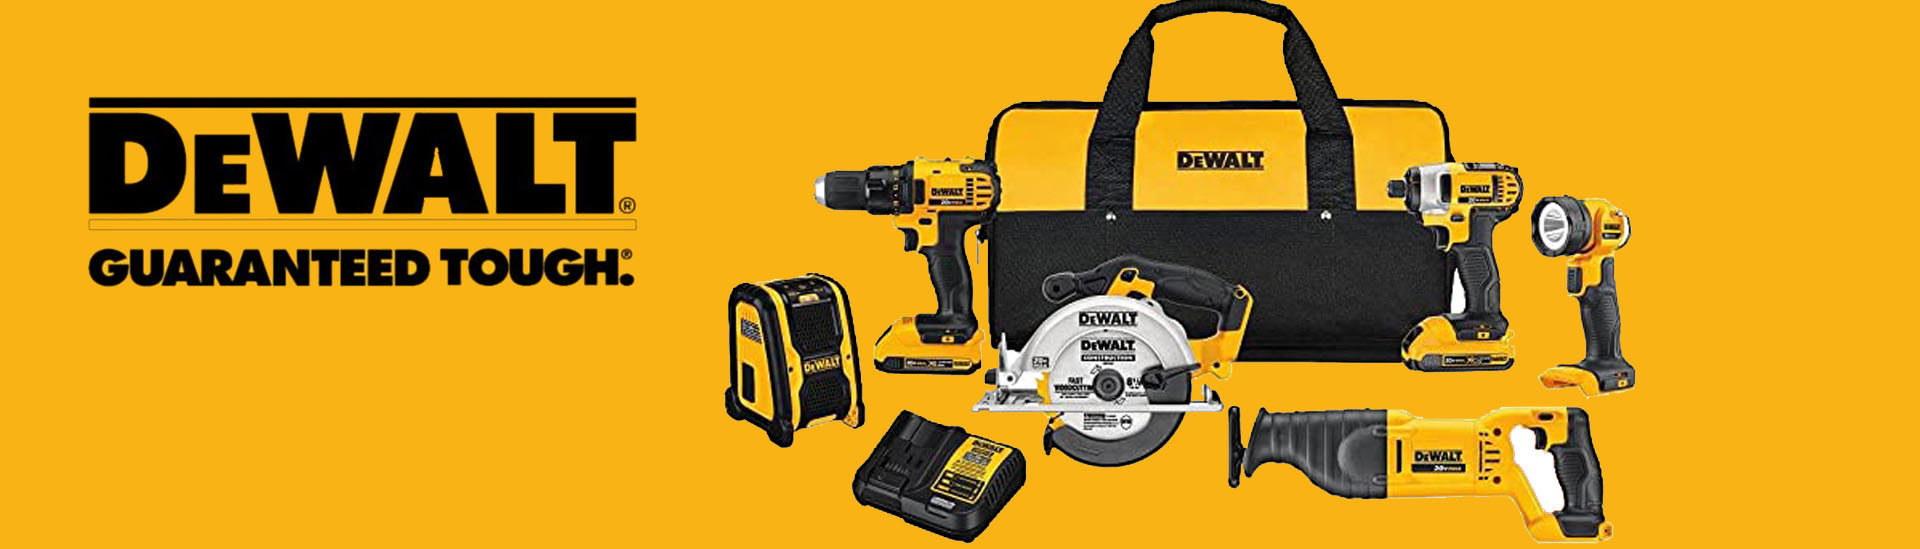 TopTools  Shop Online for Industrial Tools, Power Tools